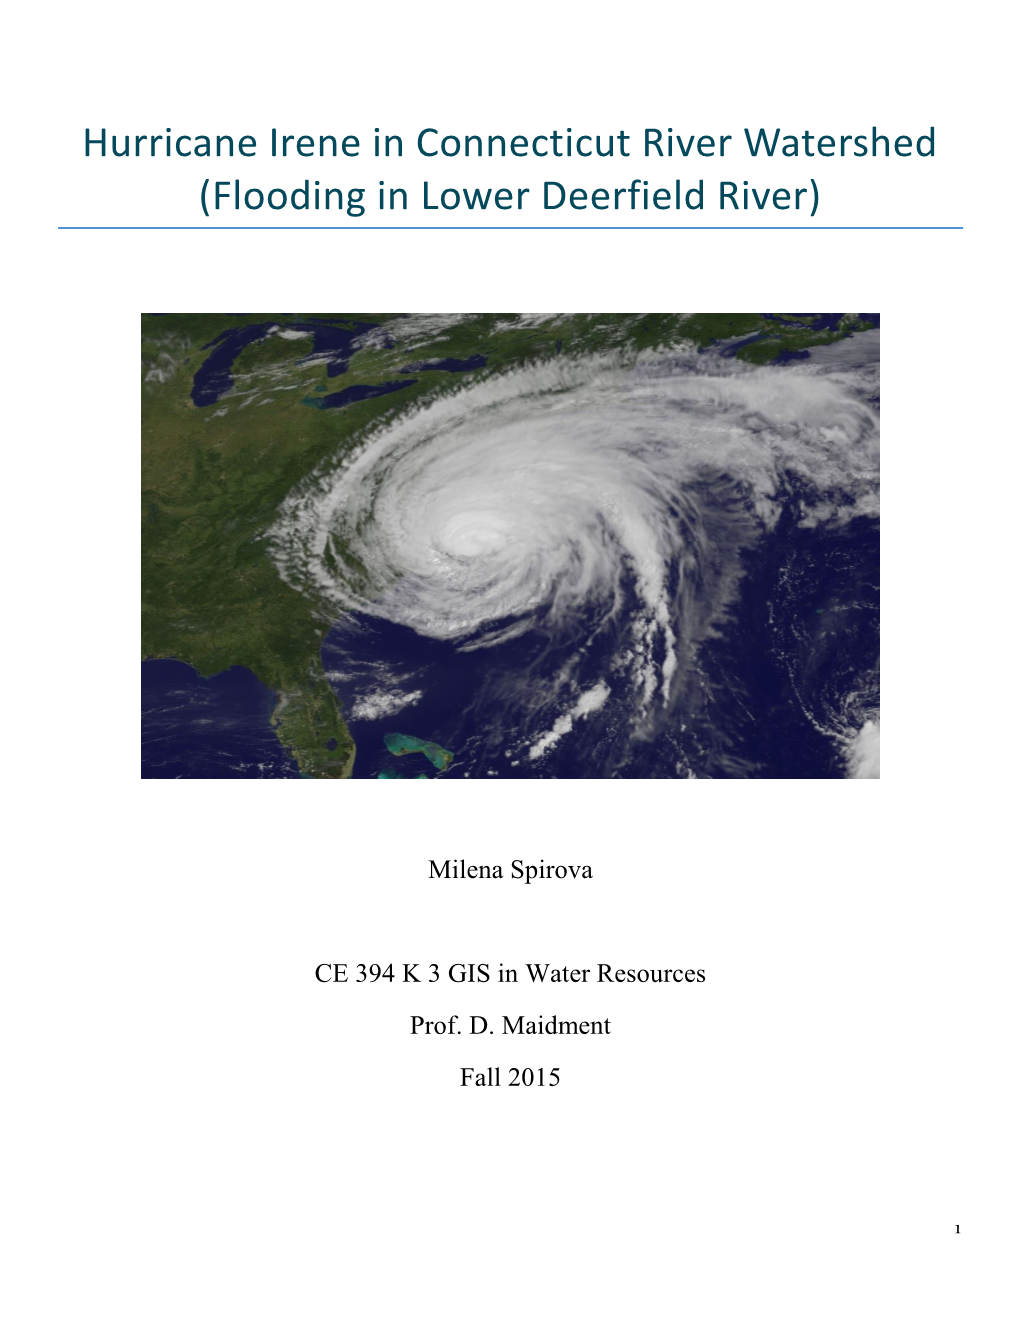 Hurricane Irene in Connecticut River Watershed (Flooding in Lower Deerfield River)